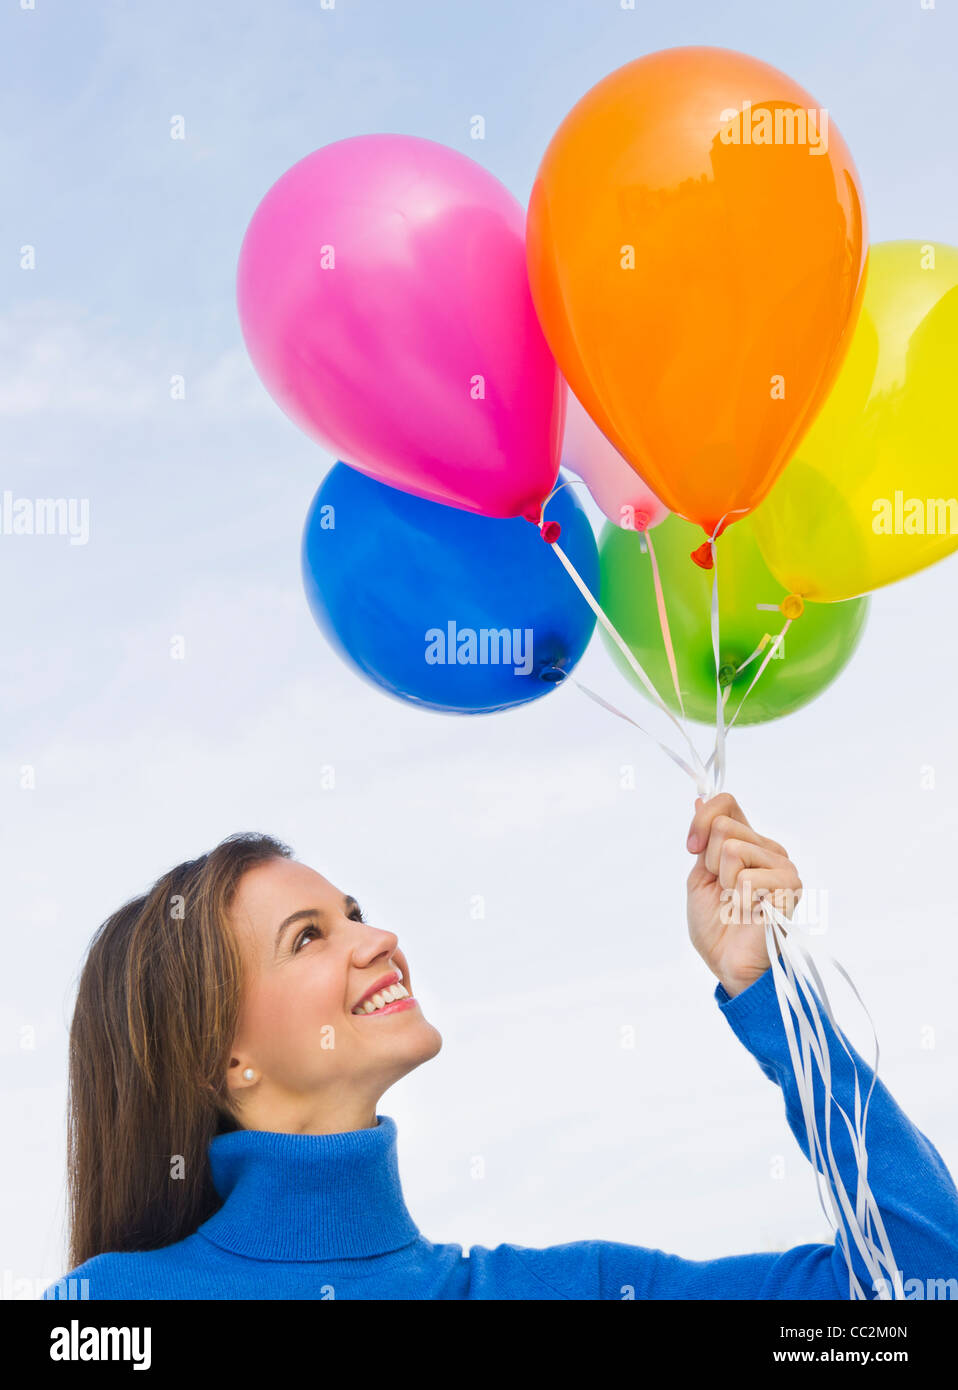 USA, New Jersey, Jersey City, Smiling woman holding balloons Banque D'Images